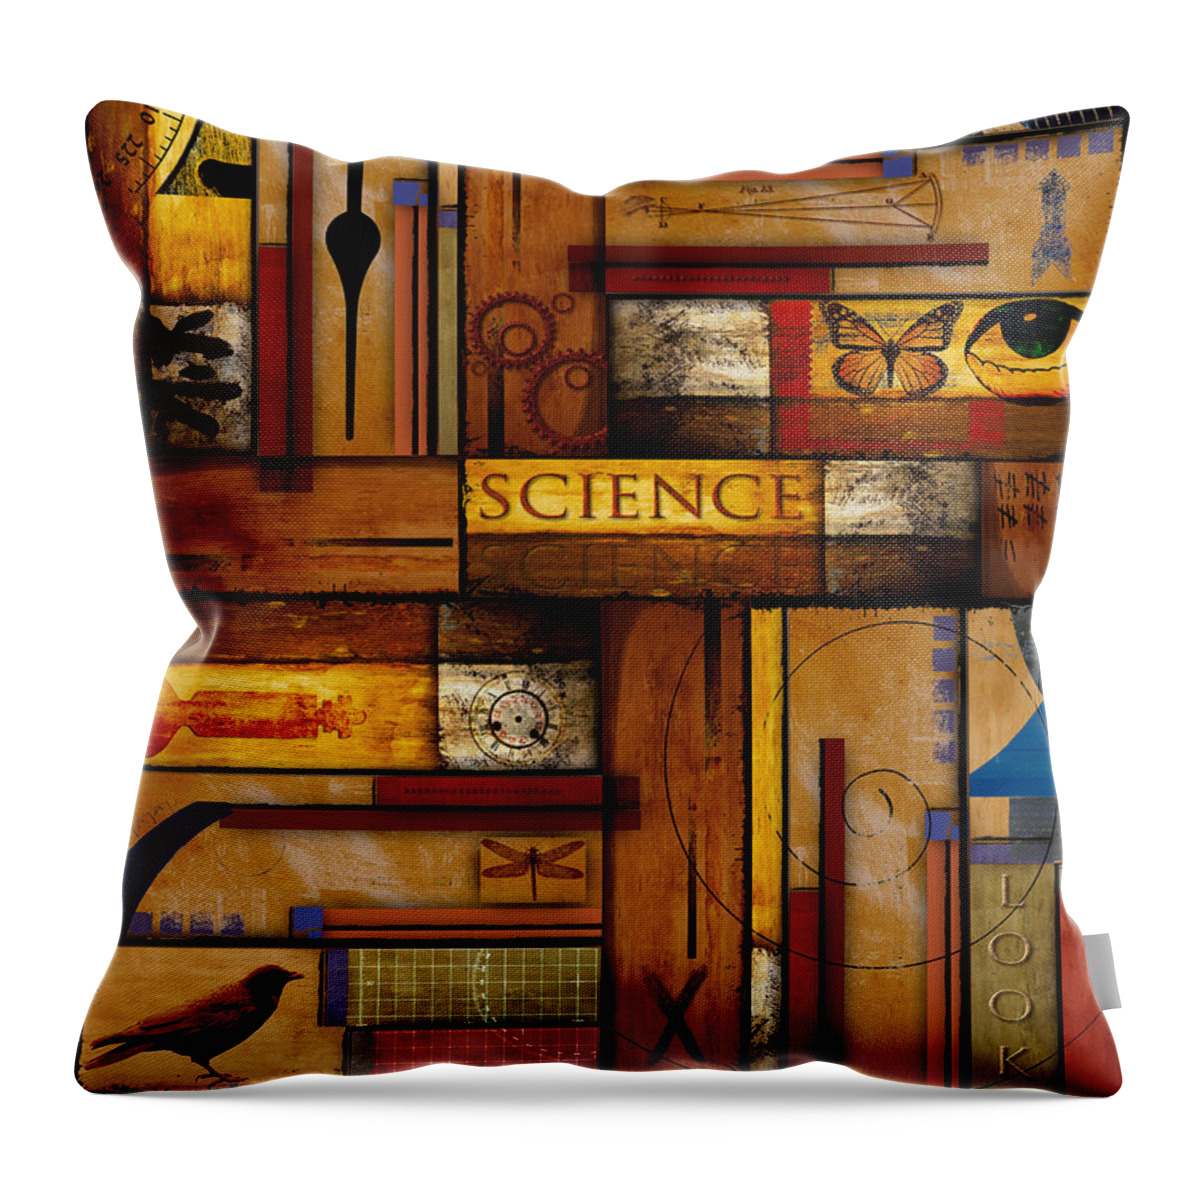 Science Throw Pillow featuring the photograph Teacher - Science by Carol Leigh